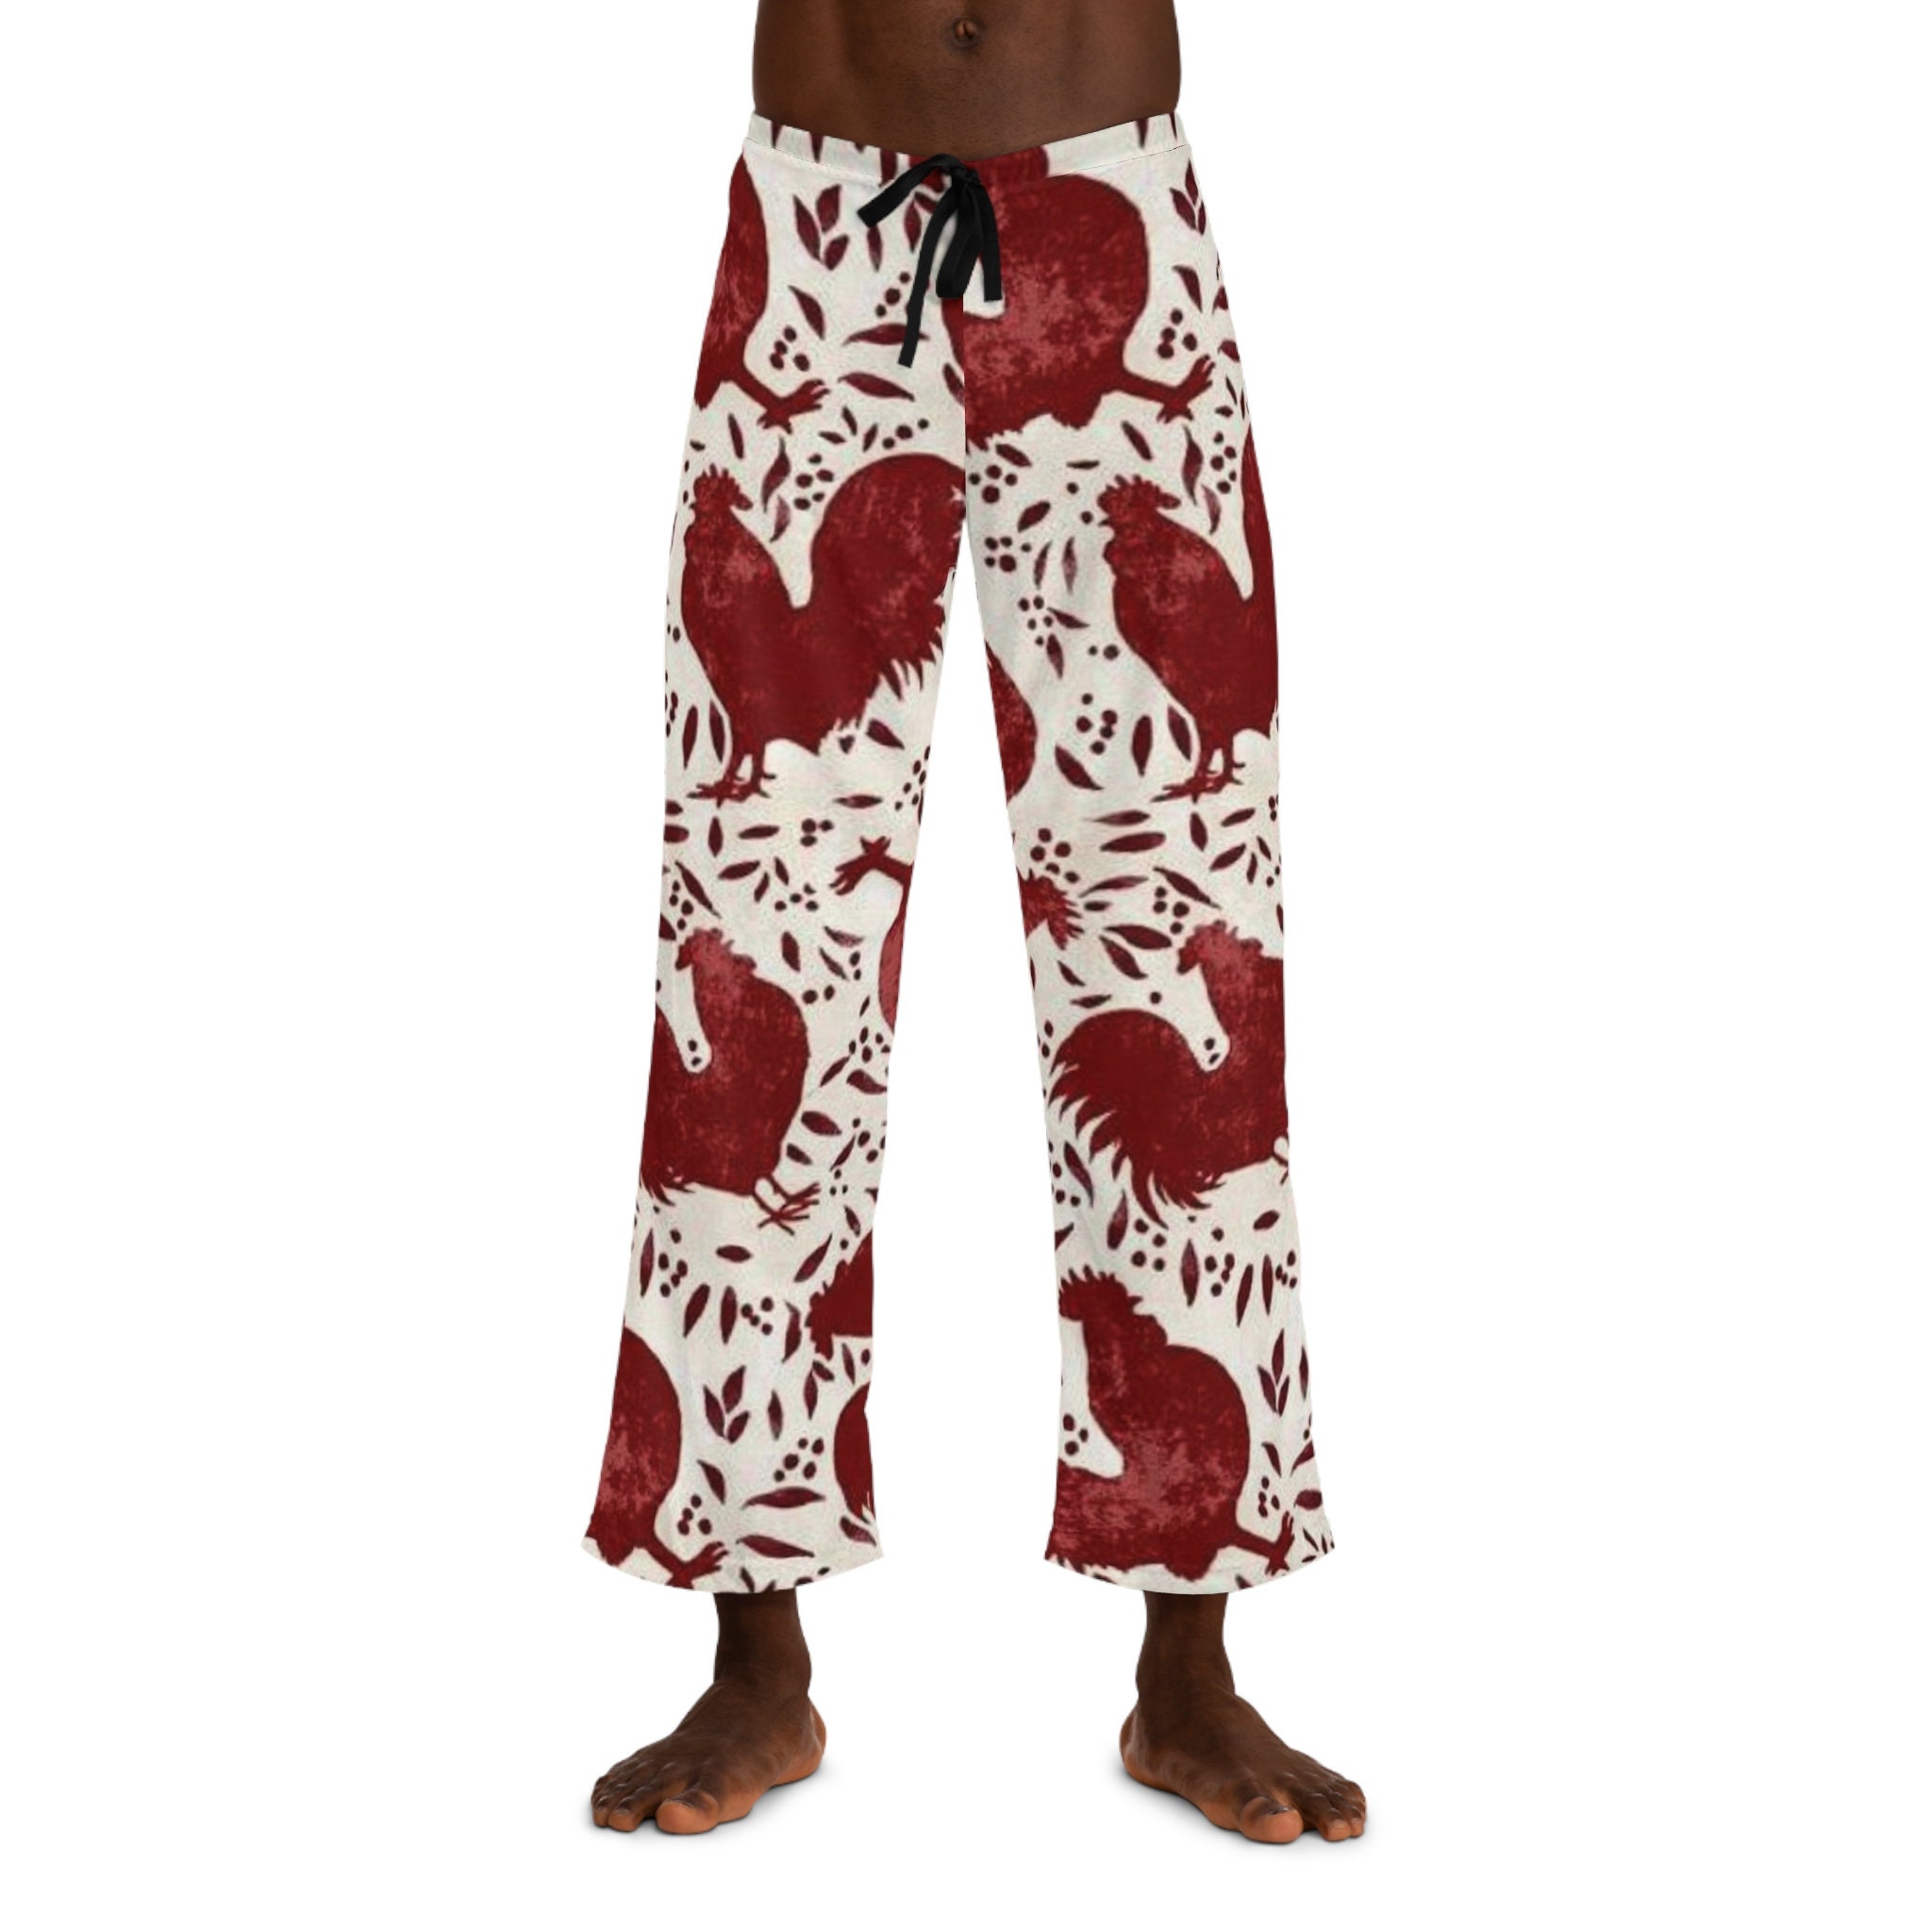 Men's Rooster Pajama Pants, Chicken Lover Pj Bottoms, Gift for Him